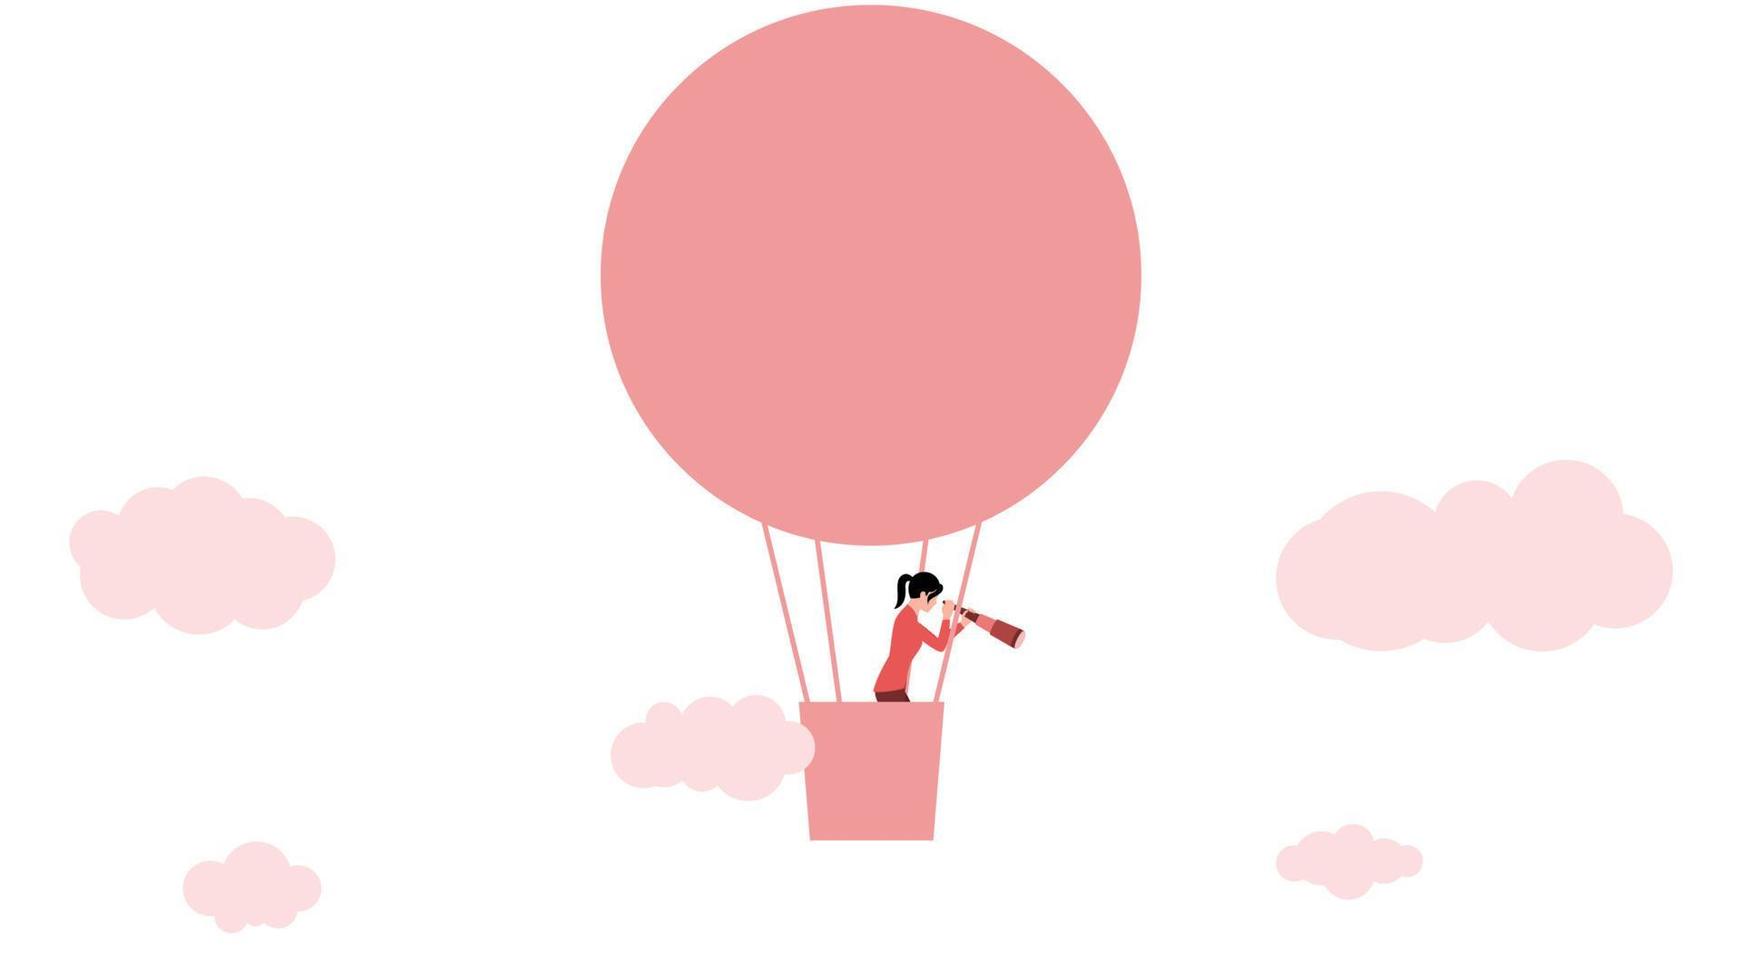 woman with telescope on hot air balloon, business character vector illustration on white background.